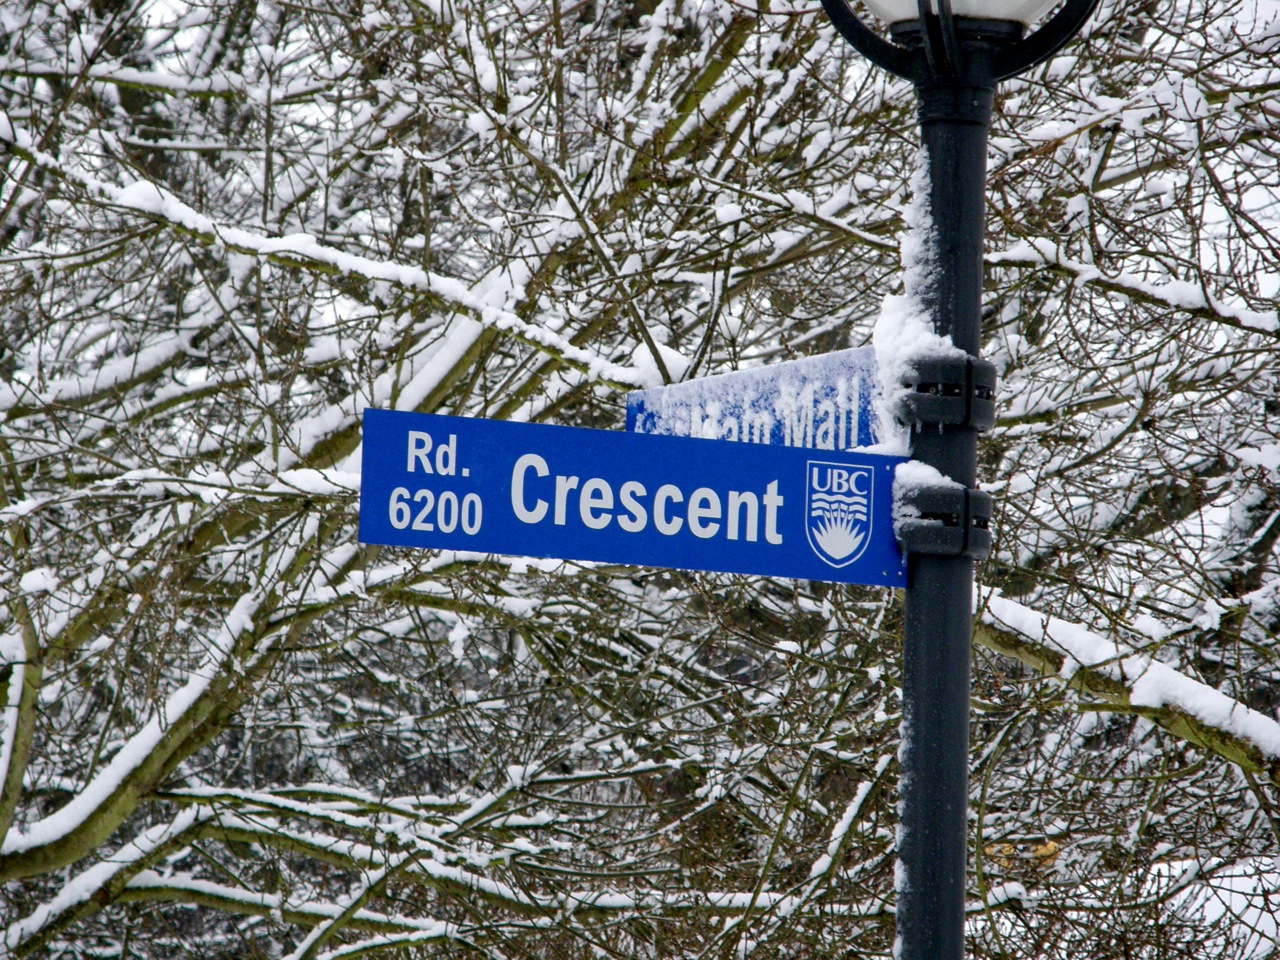 street signs with snow on trees and one of the lights on the pole